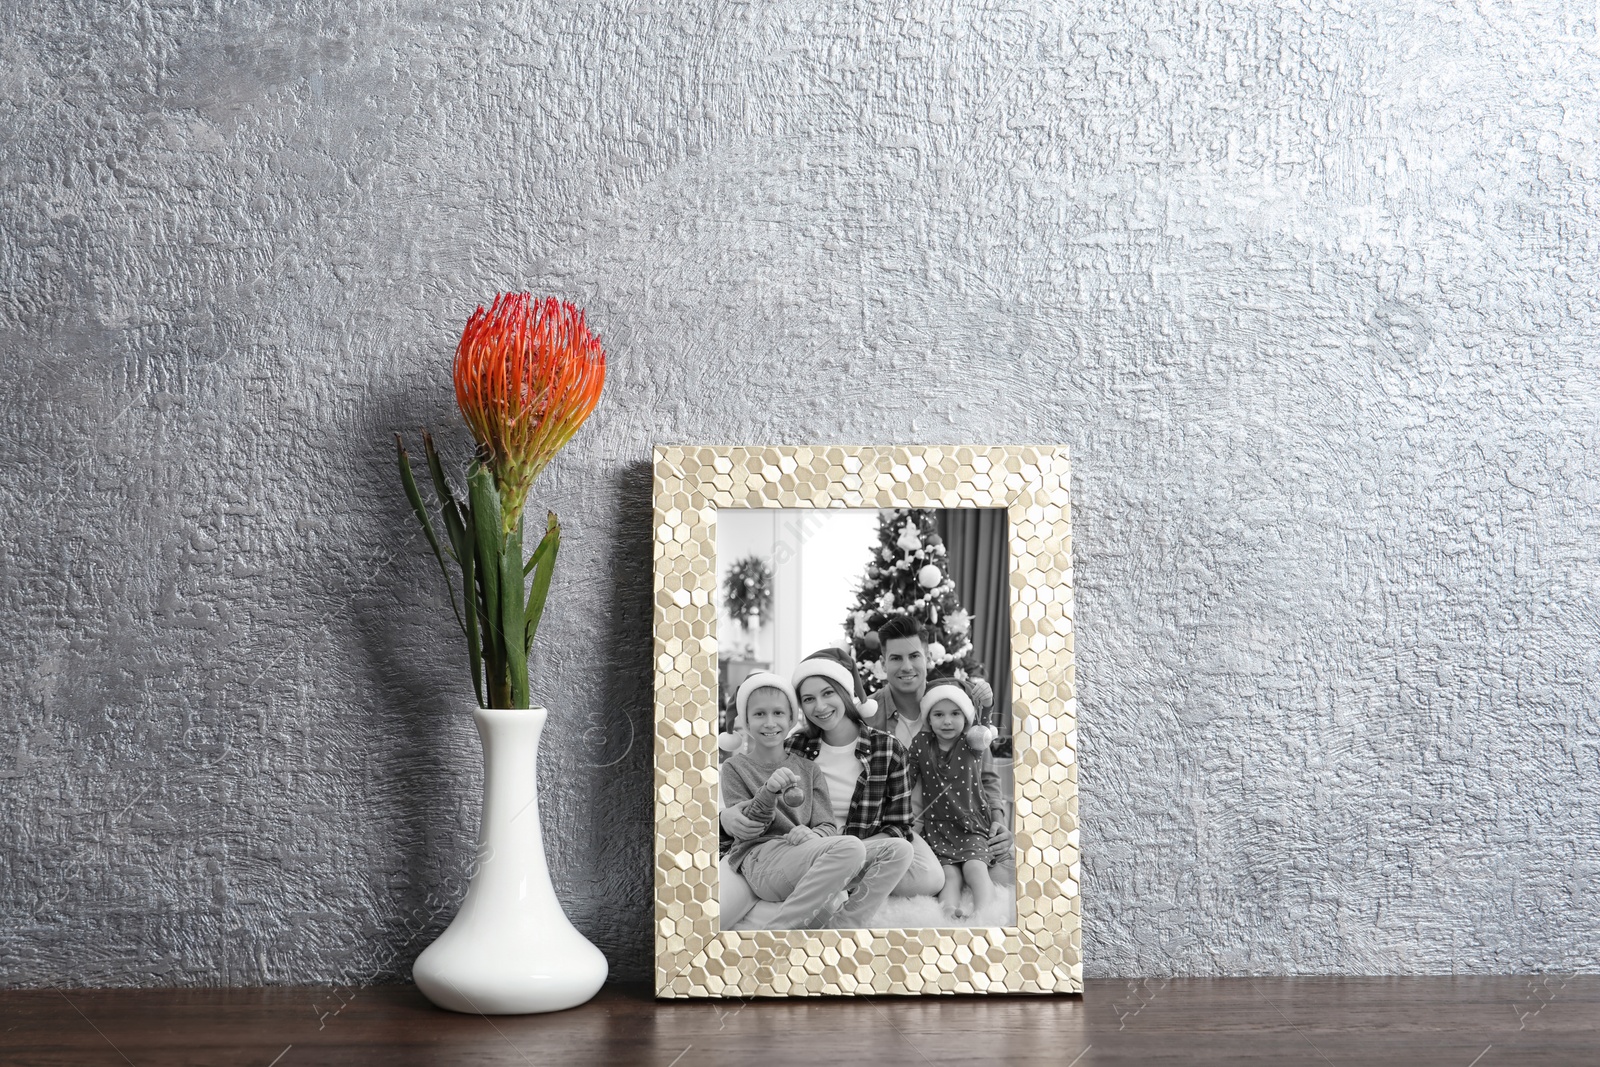 Image of Black and white Christmas portrait of family in photo frame on table near grey wall